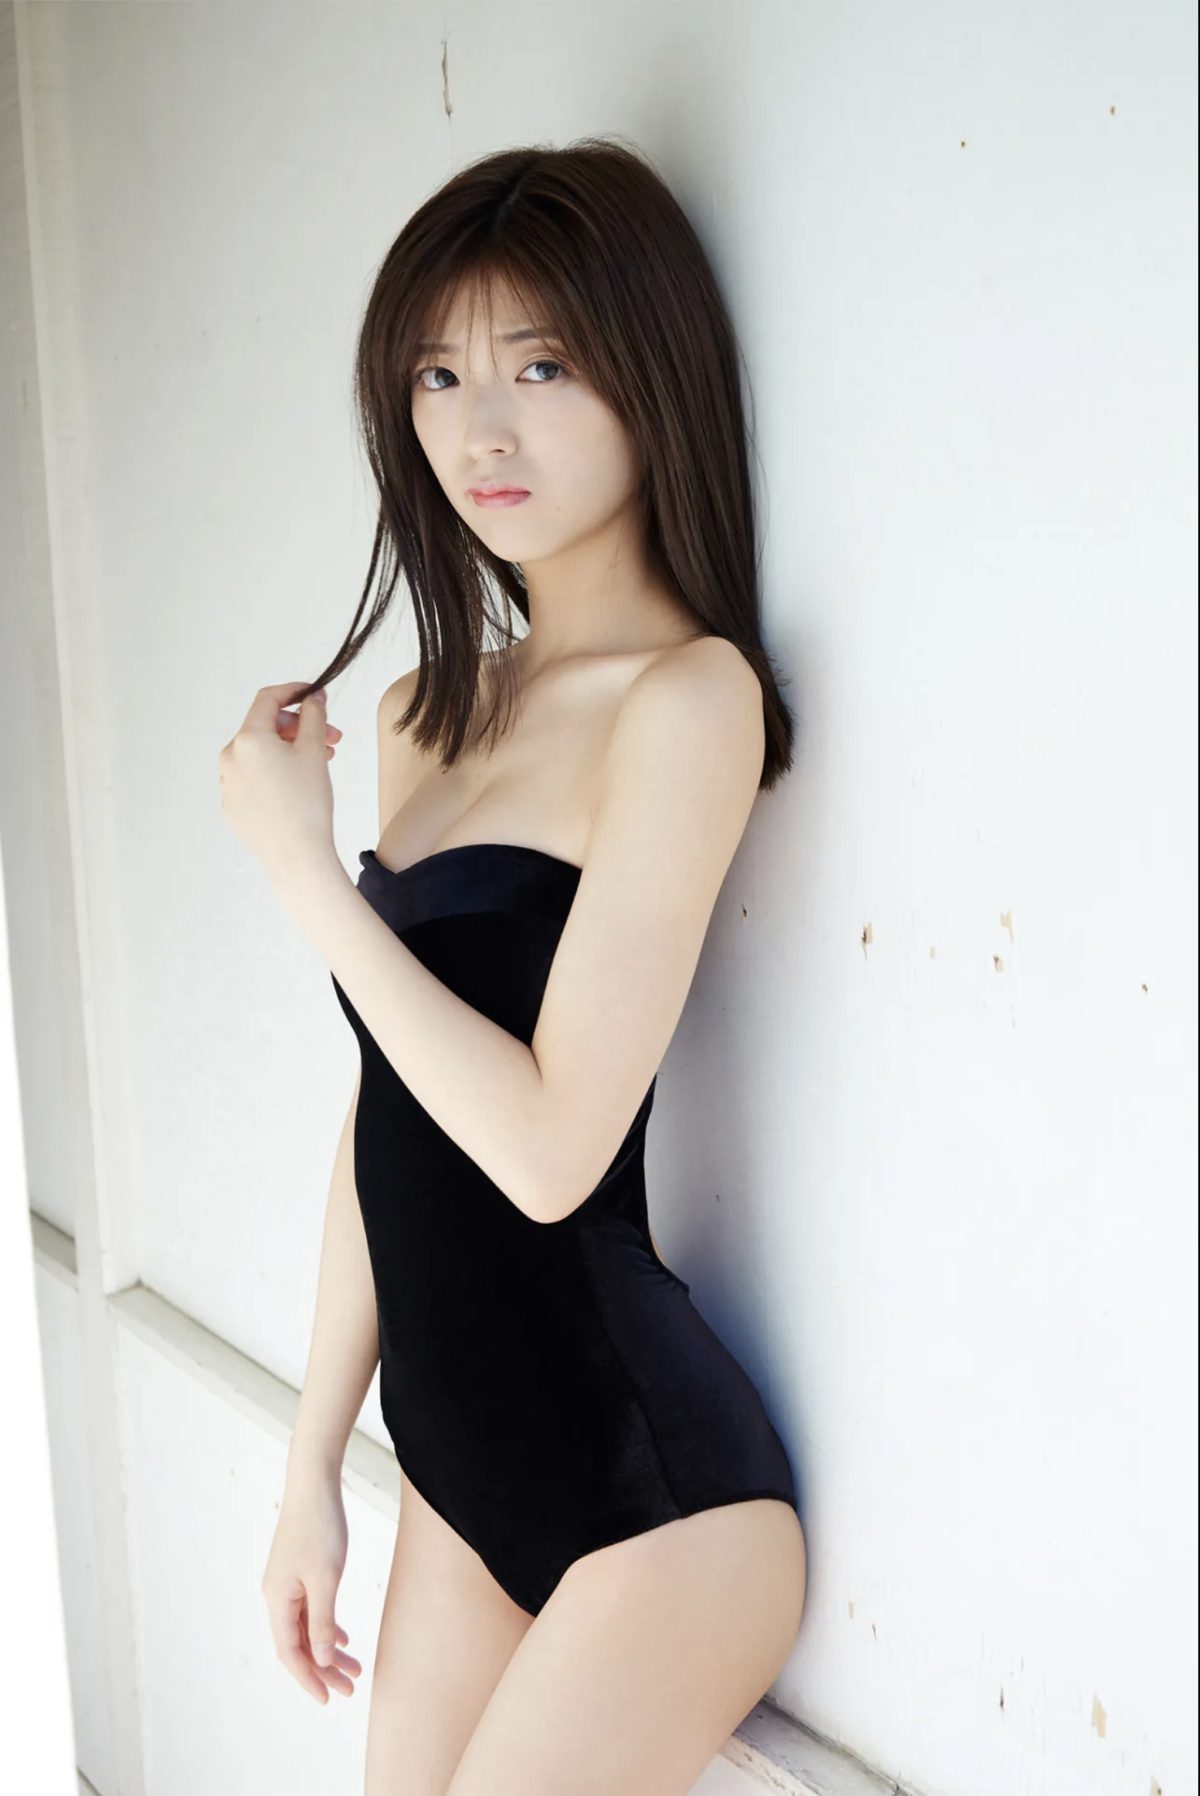 FRIDAY Digital Photobook 2021 03 10 Mio Kudo 工藤美桜 Adult SEXY that fascinates for the first time はじめて魅せる大人ＳＥＸＹ 009 3238064004.jpg